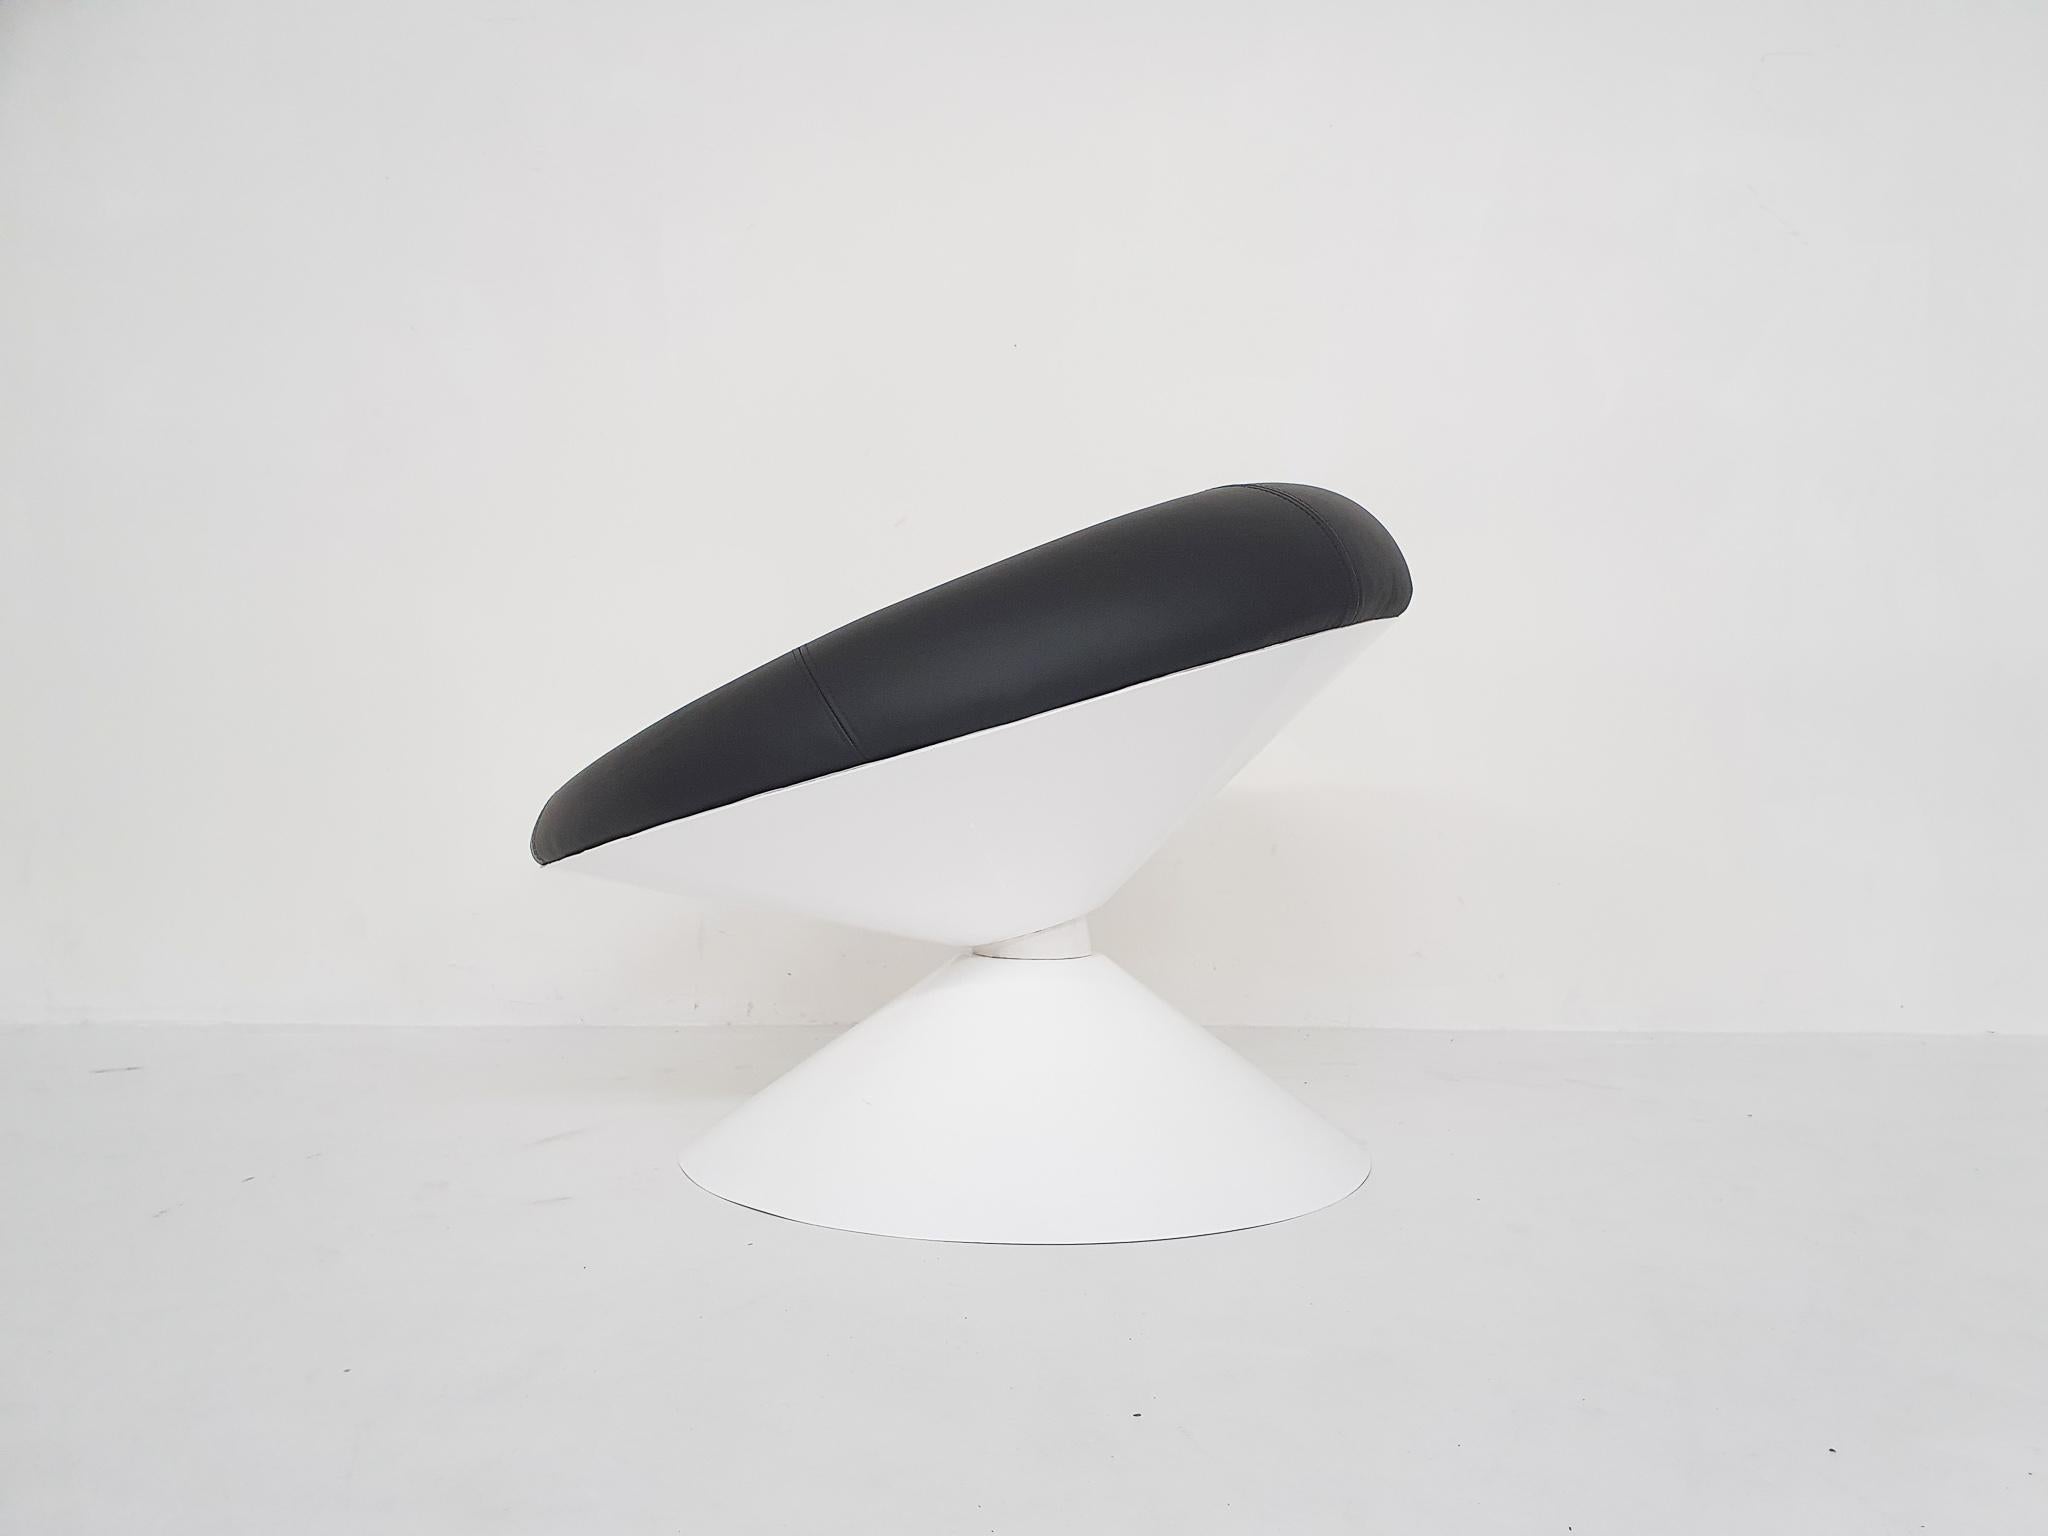 This beautiful piece of Mid-century furniture is called the “Diabolo” lounge chair. A highly rare and exclusive lounge chair made by Stabin Bennis The Netherlands and designed by Dutch designer Ben Swildens in the 1960’s.

The name diabolo is